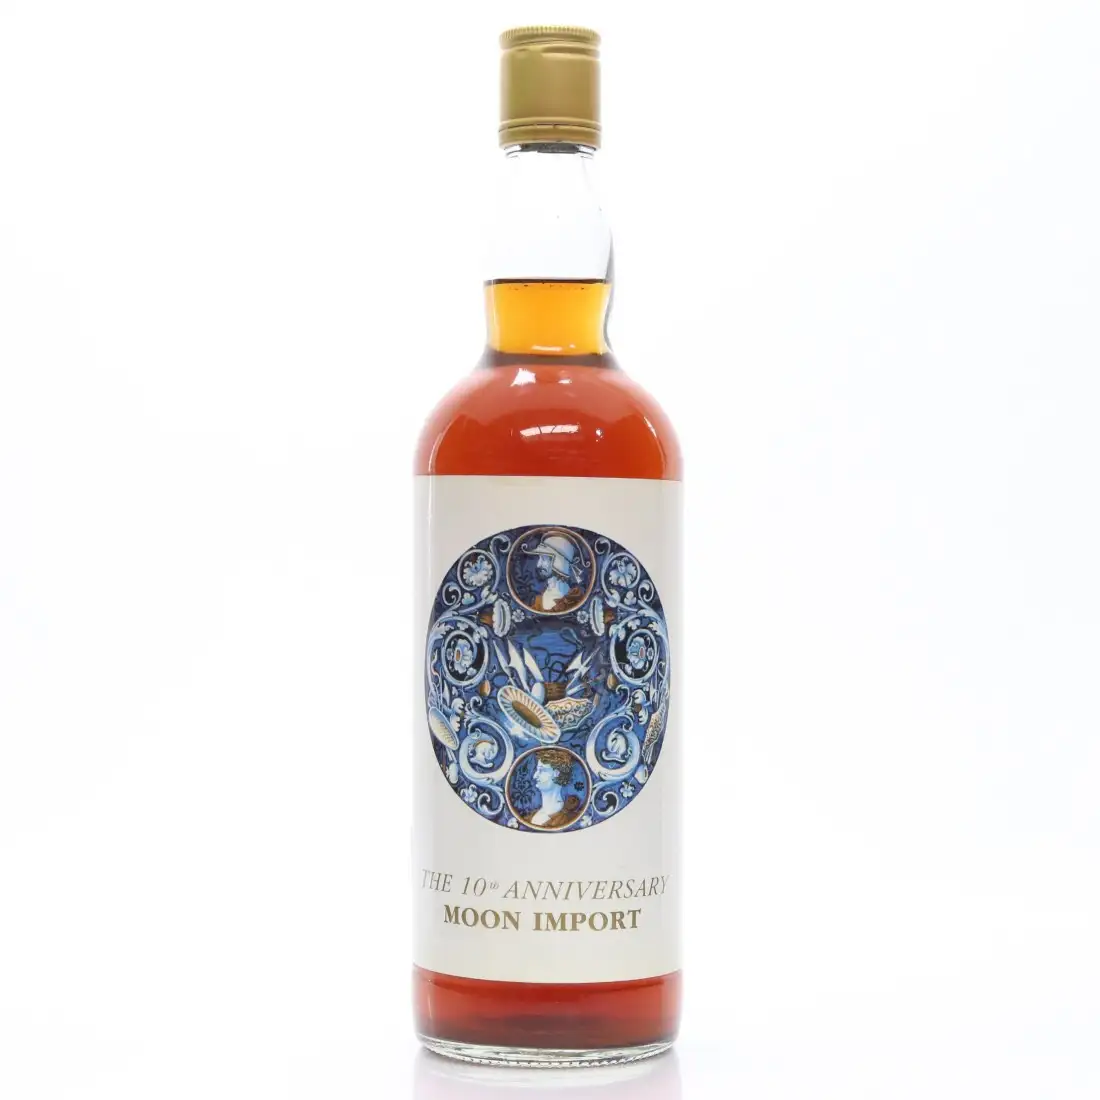 Image of the front of the bottle of the rum 10th Anniversary